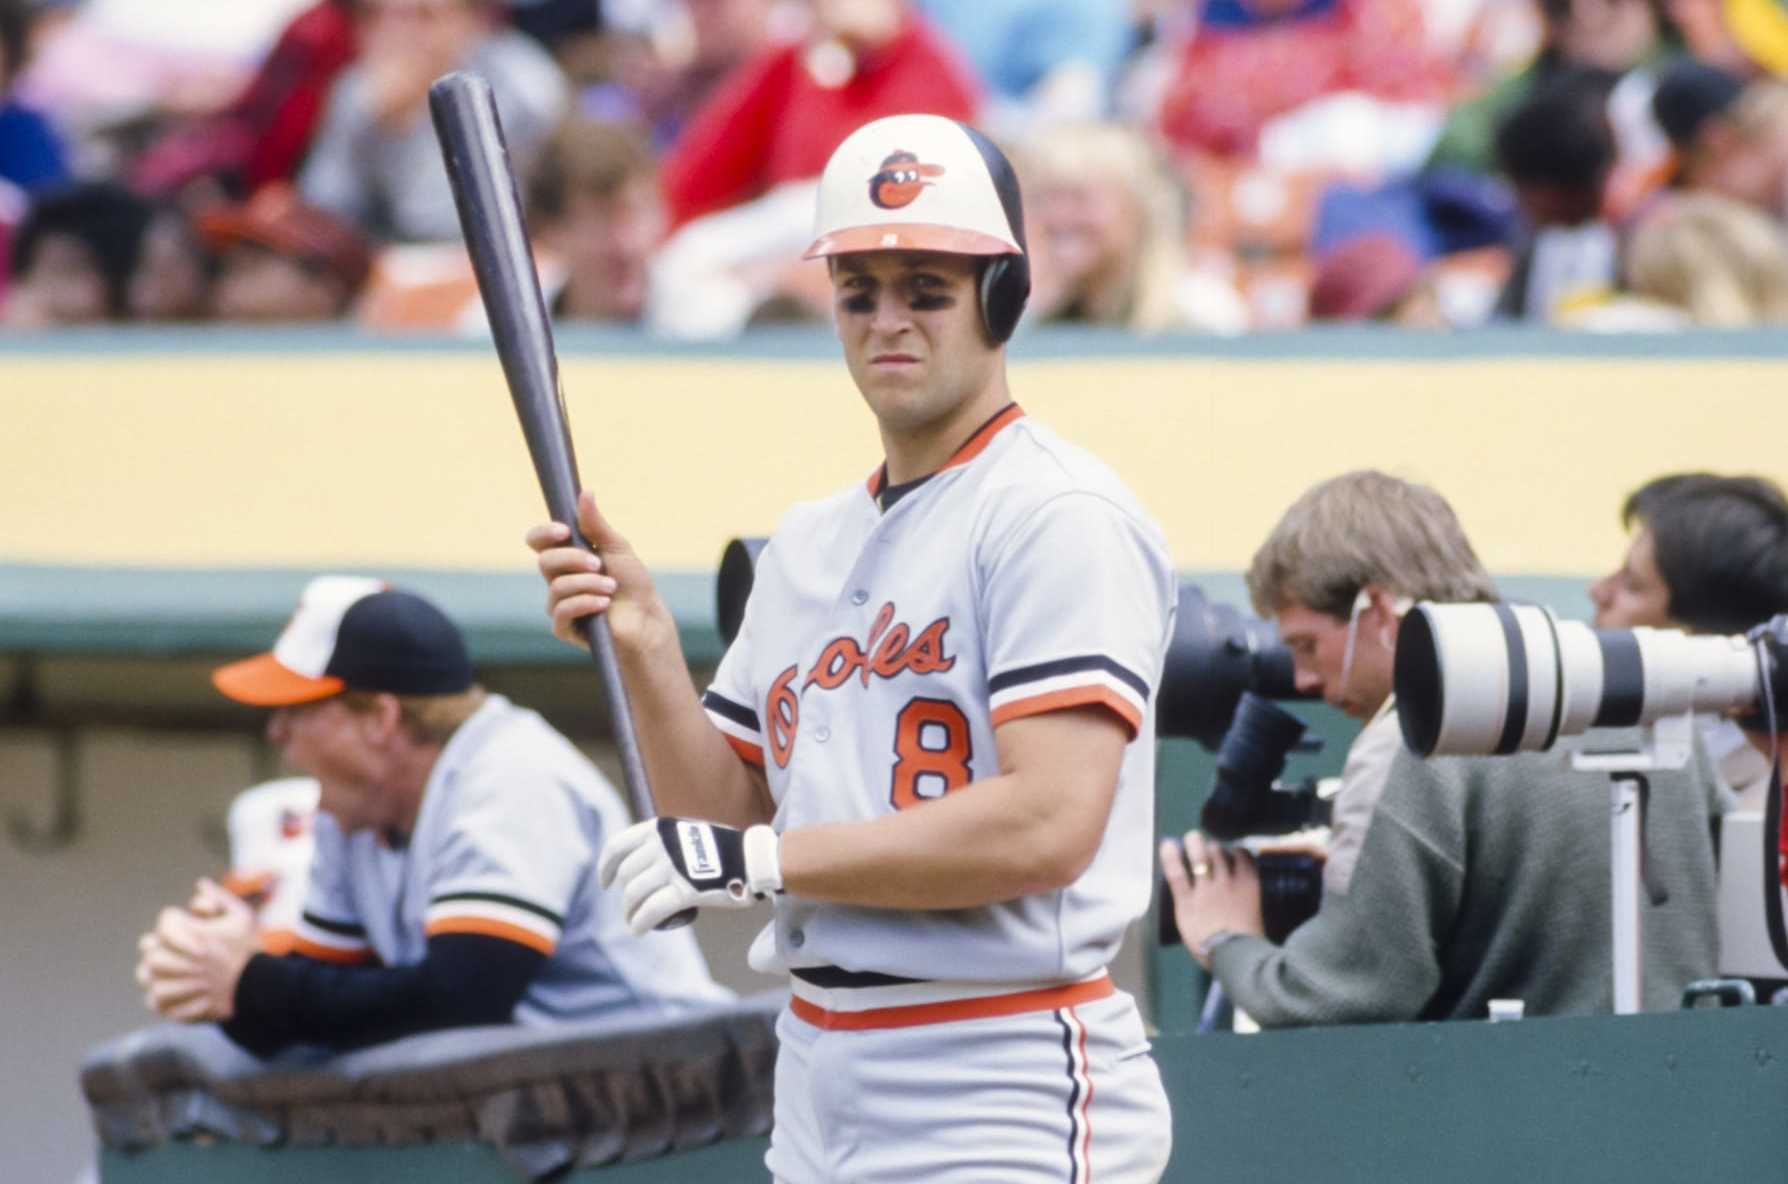 Trammell joins baseball's elite shortstops in Cooperstown - Vintage Detroit  Collection